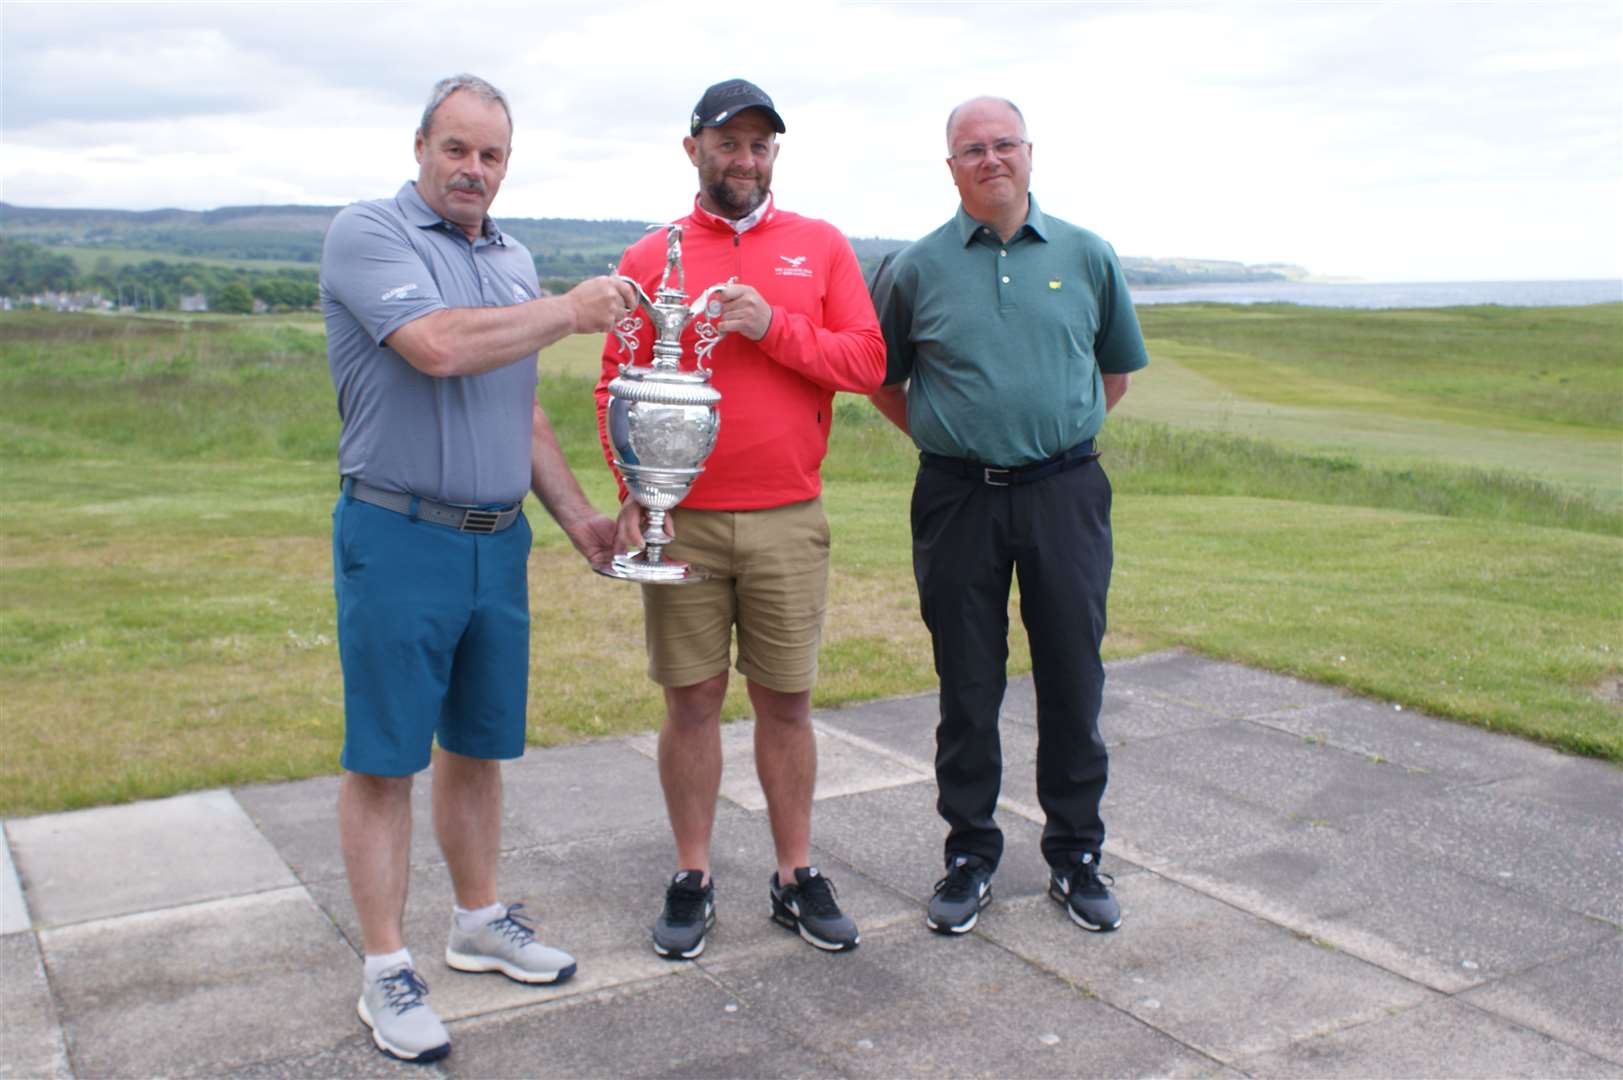 Christopher Mailley receiving the trophy from Golspie GC Captain William Macbeath with runner-up Roddy Cameron in attendance. This is the eighth occasion on which Christopher Mailley has won the championship.